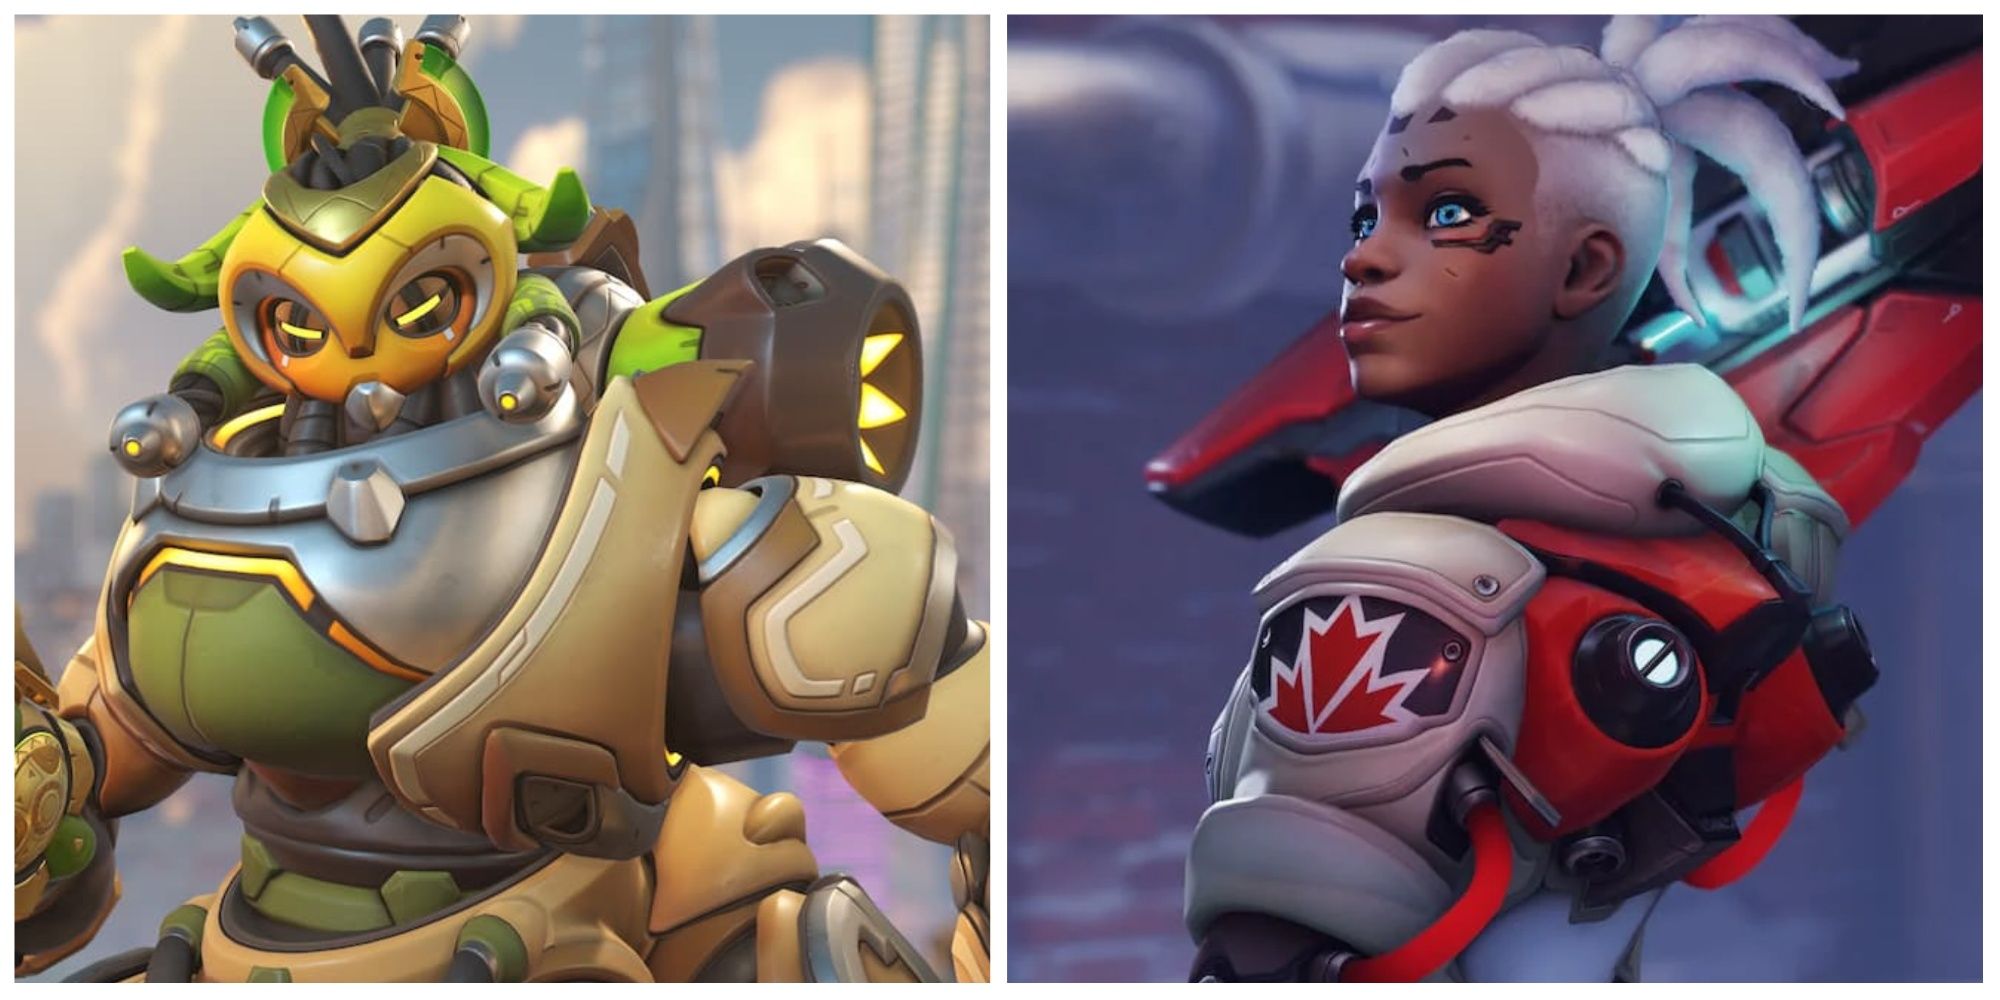 Overwatch 2 screenshot of characters Orisa (left) and Sojourn (right)